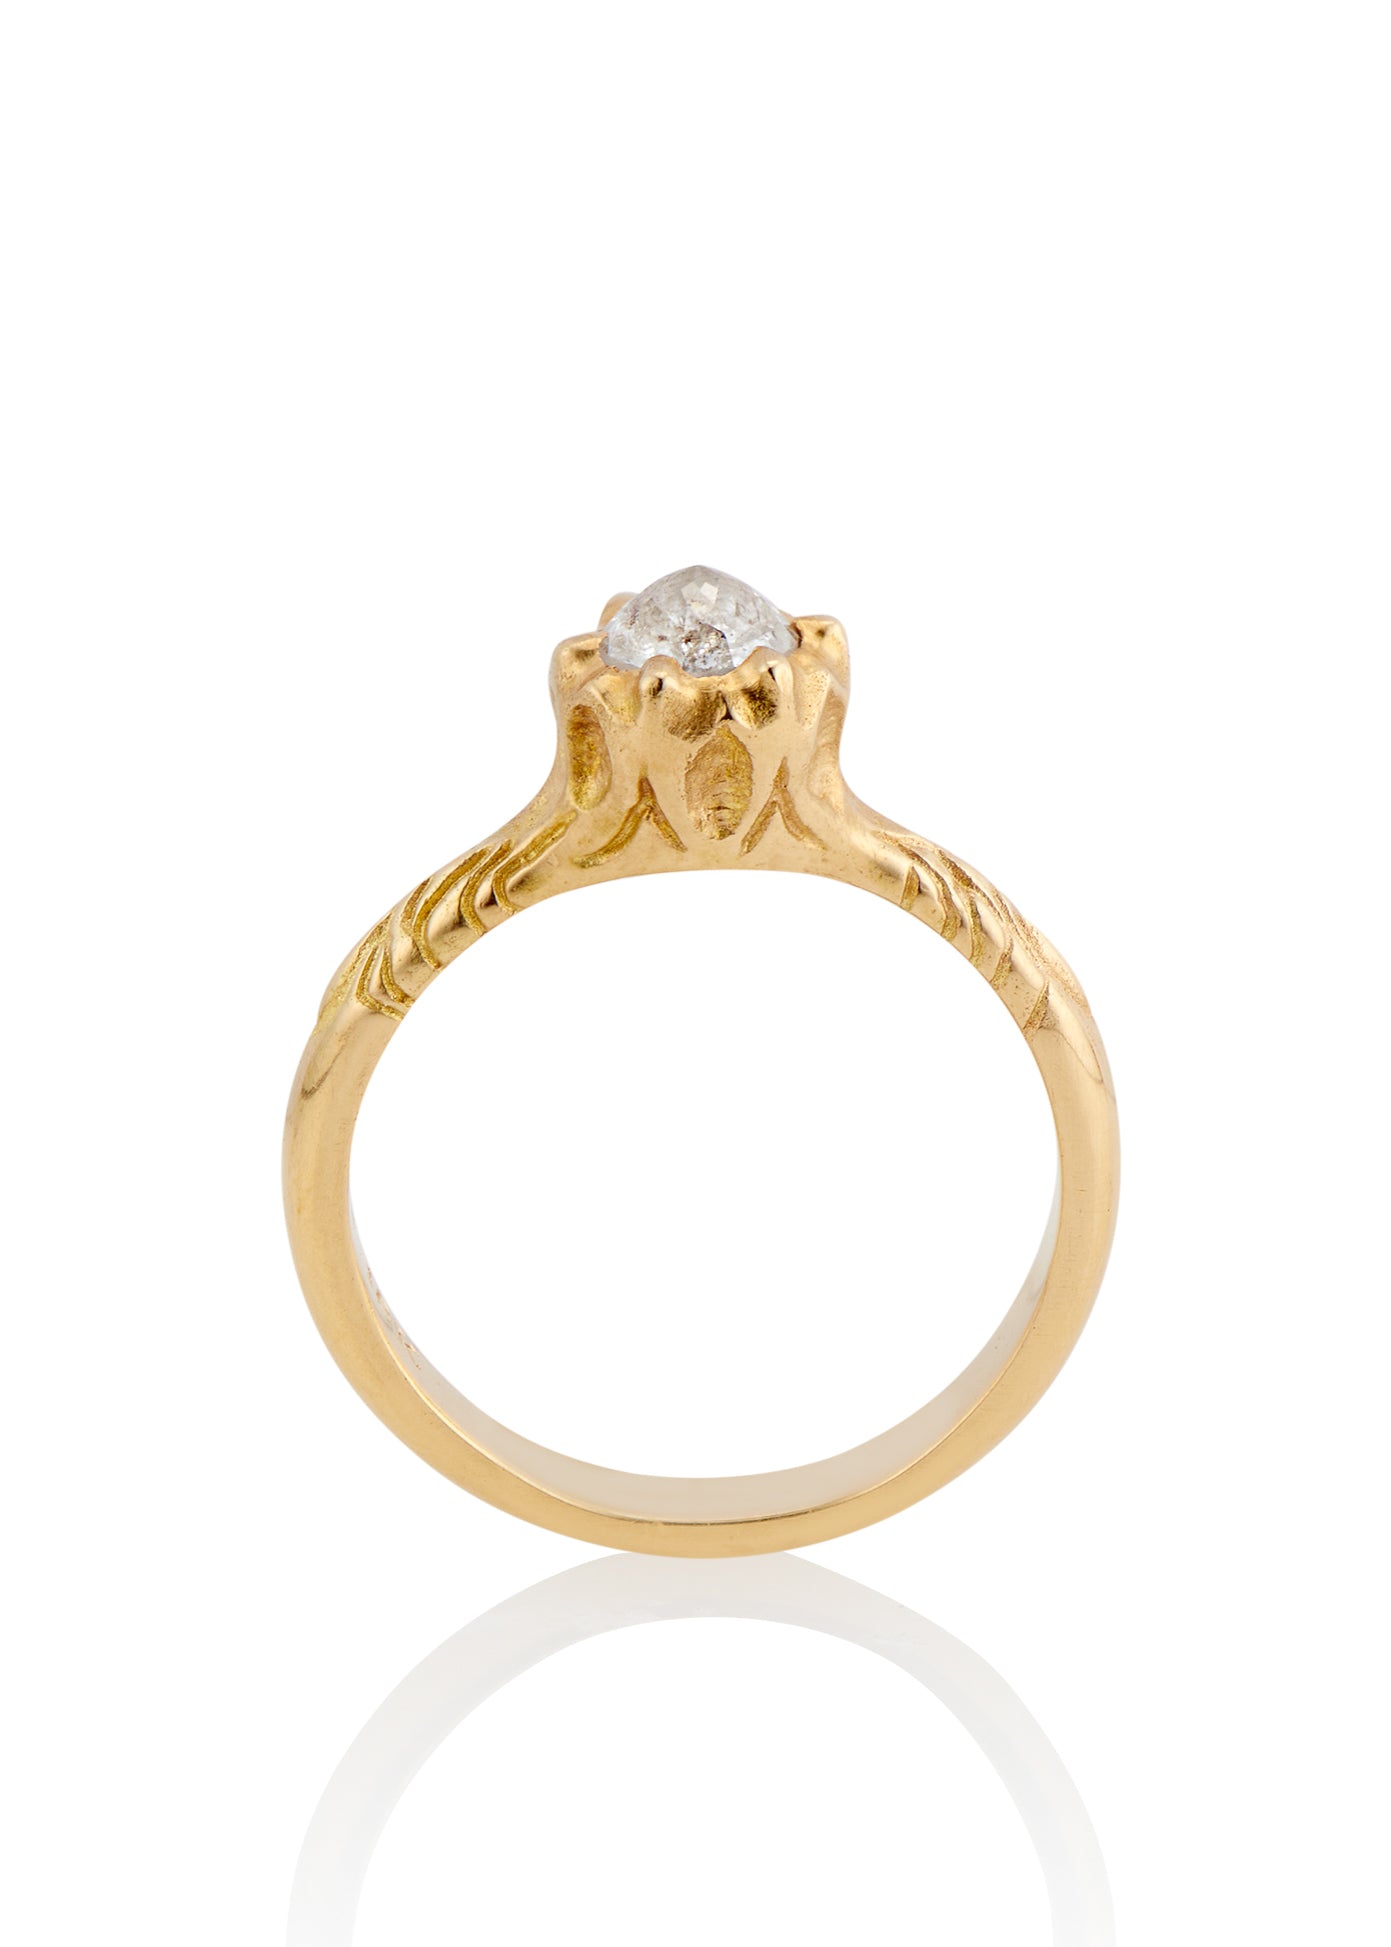 Like the haunting notes of a Glenn Miller Orchestra record, the Perfidia ring ascends to prominence on the finger to captivate all who bear witness to such beauty. Delicate details on the gold band give way to a textured pattern that holds a rose cut diamond, an exquisite work of ornate craftsmanship. 